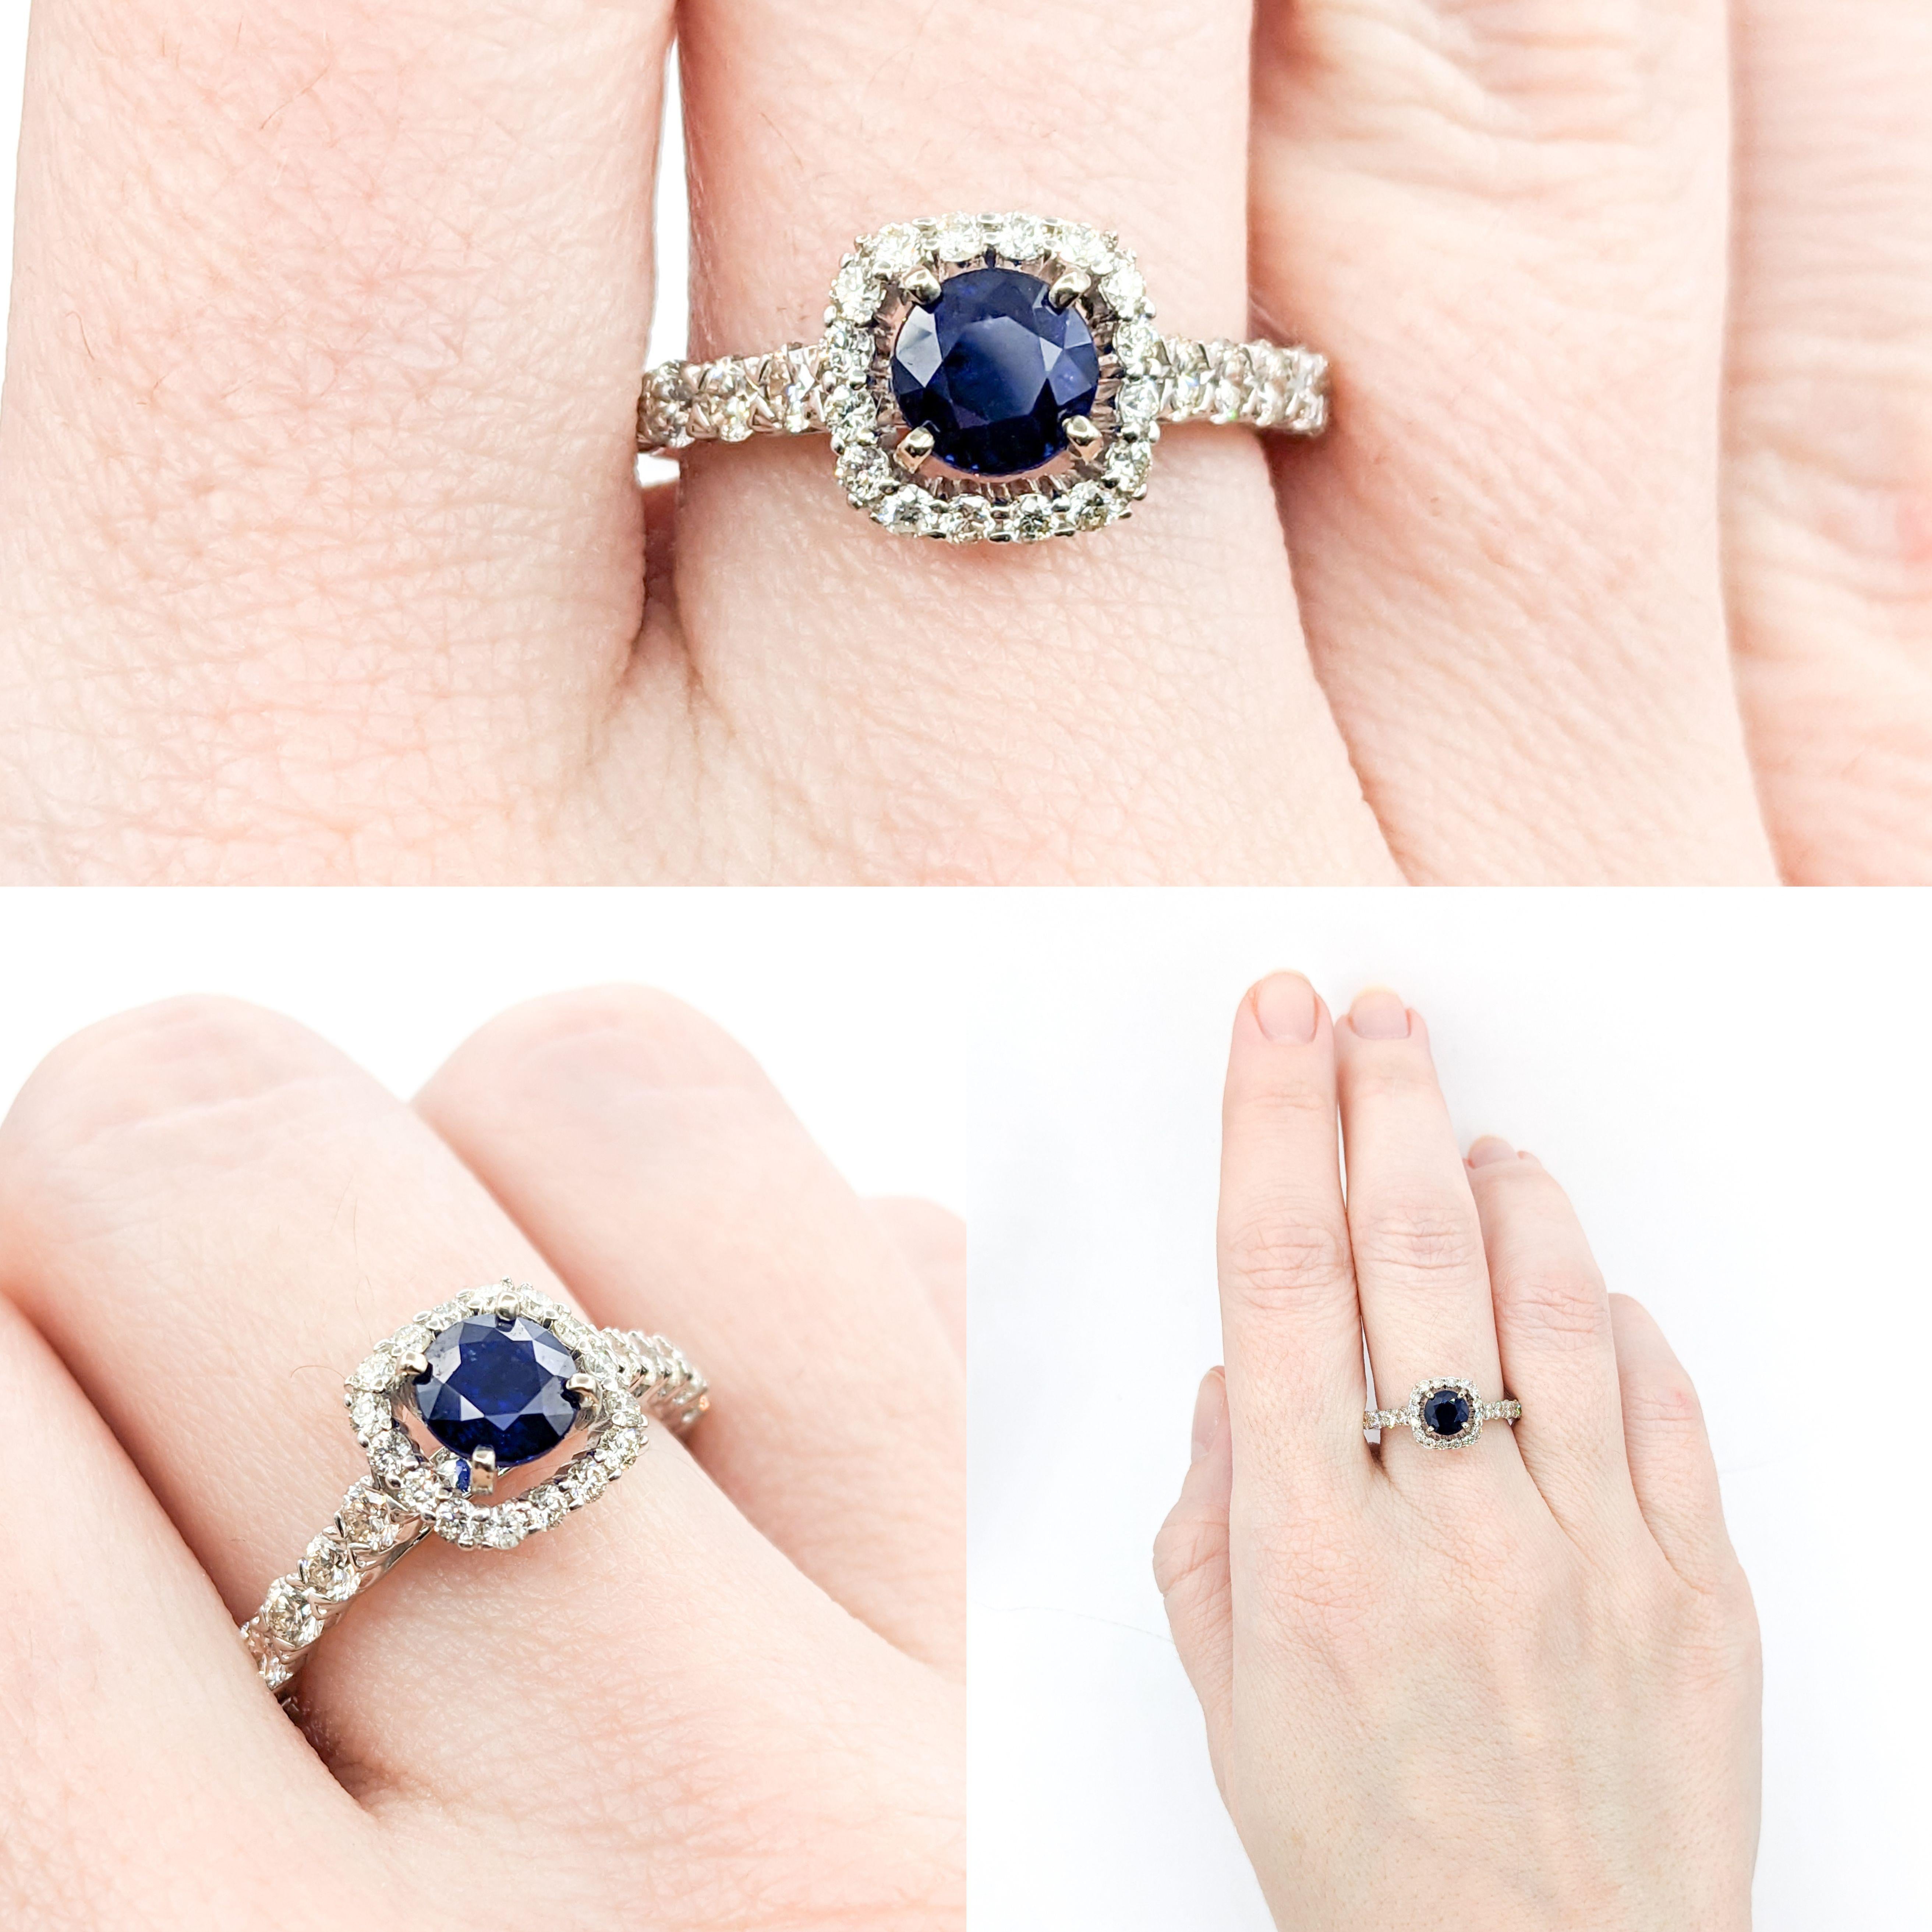 Beautiful Natural Sapphire & Diamond Engagement Ring

This stunning ring is crafted in 14kw white gold and showcases a 1.10ct sapphire, flanked by sparkling diamonds with a total weight of 0.84ctw. The diamonds are of H color and SI1-SI2 clarity,